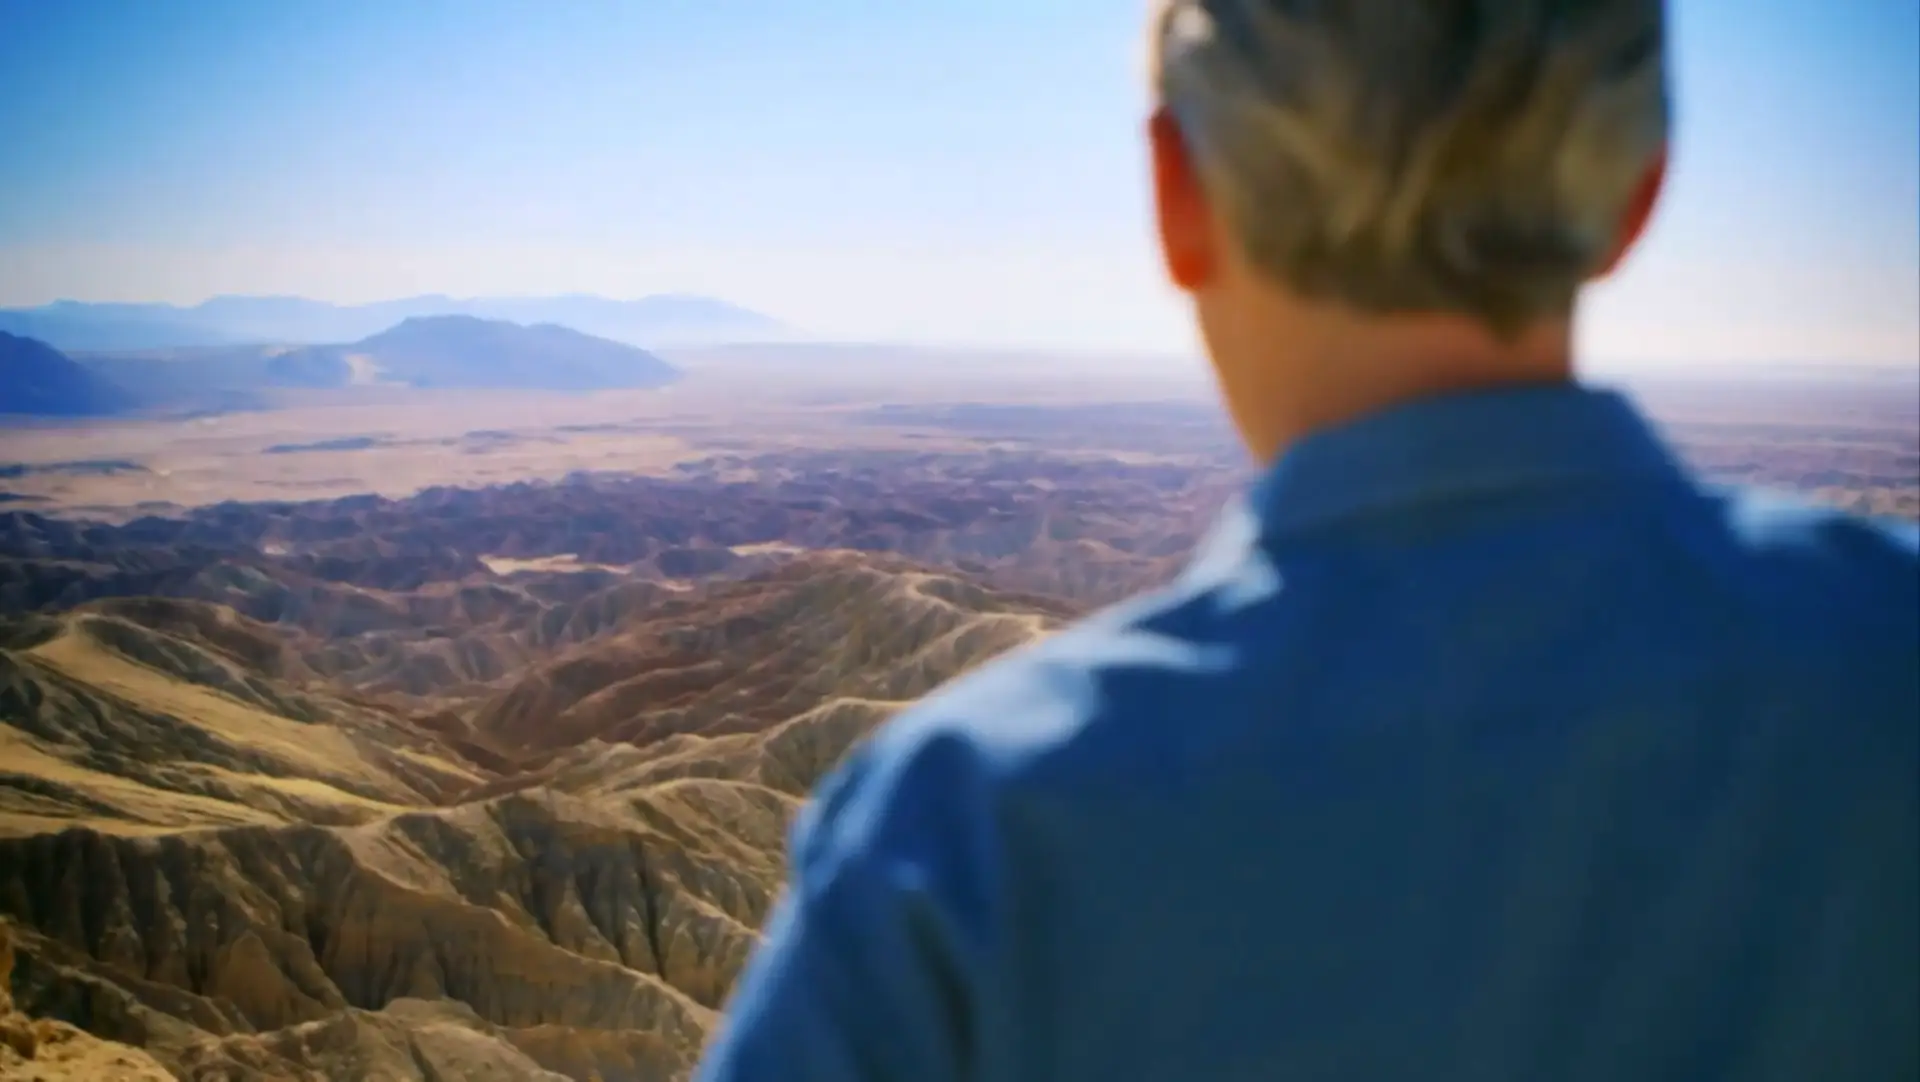 A man is standing on top of a mountain overlooking a valley, featuring breathtaking views.